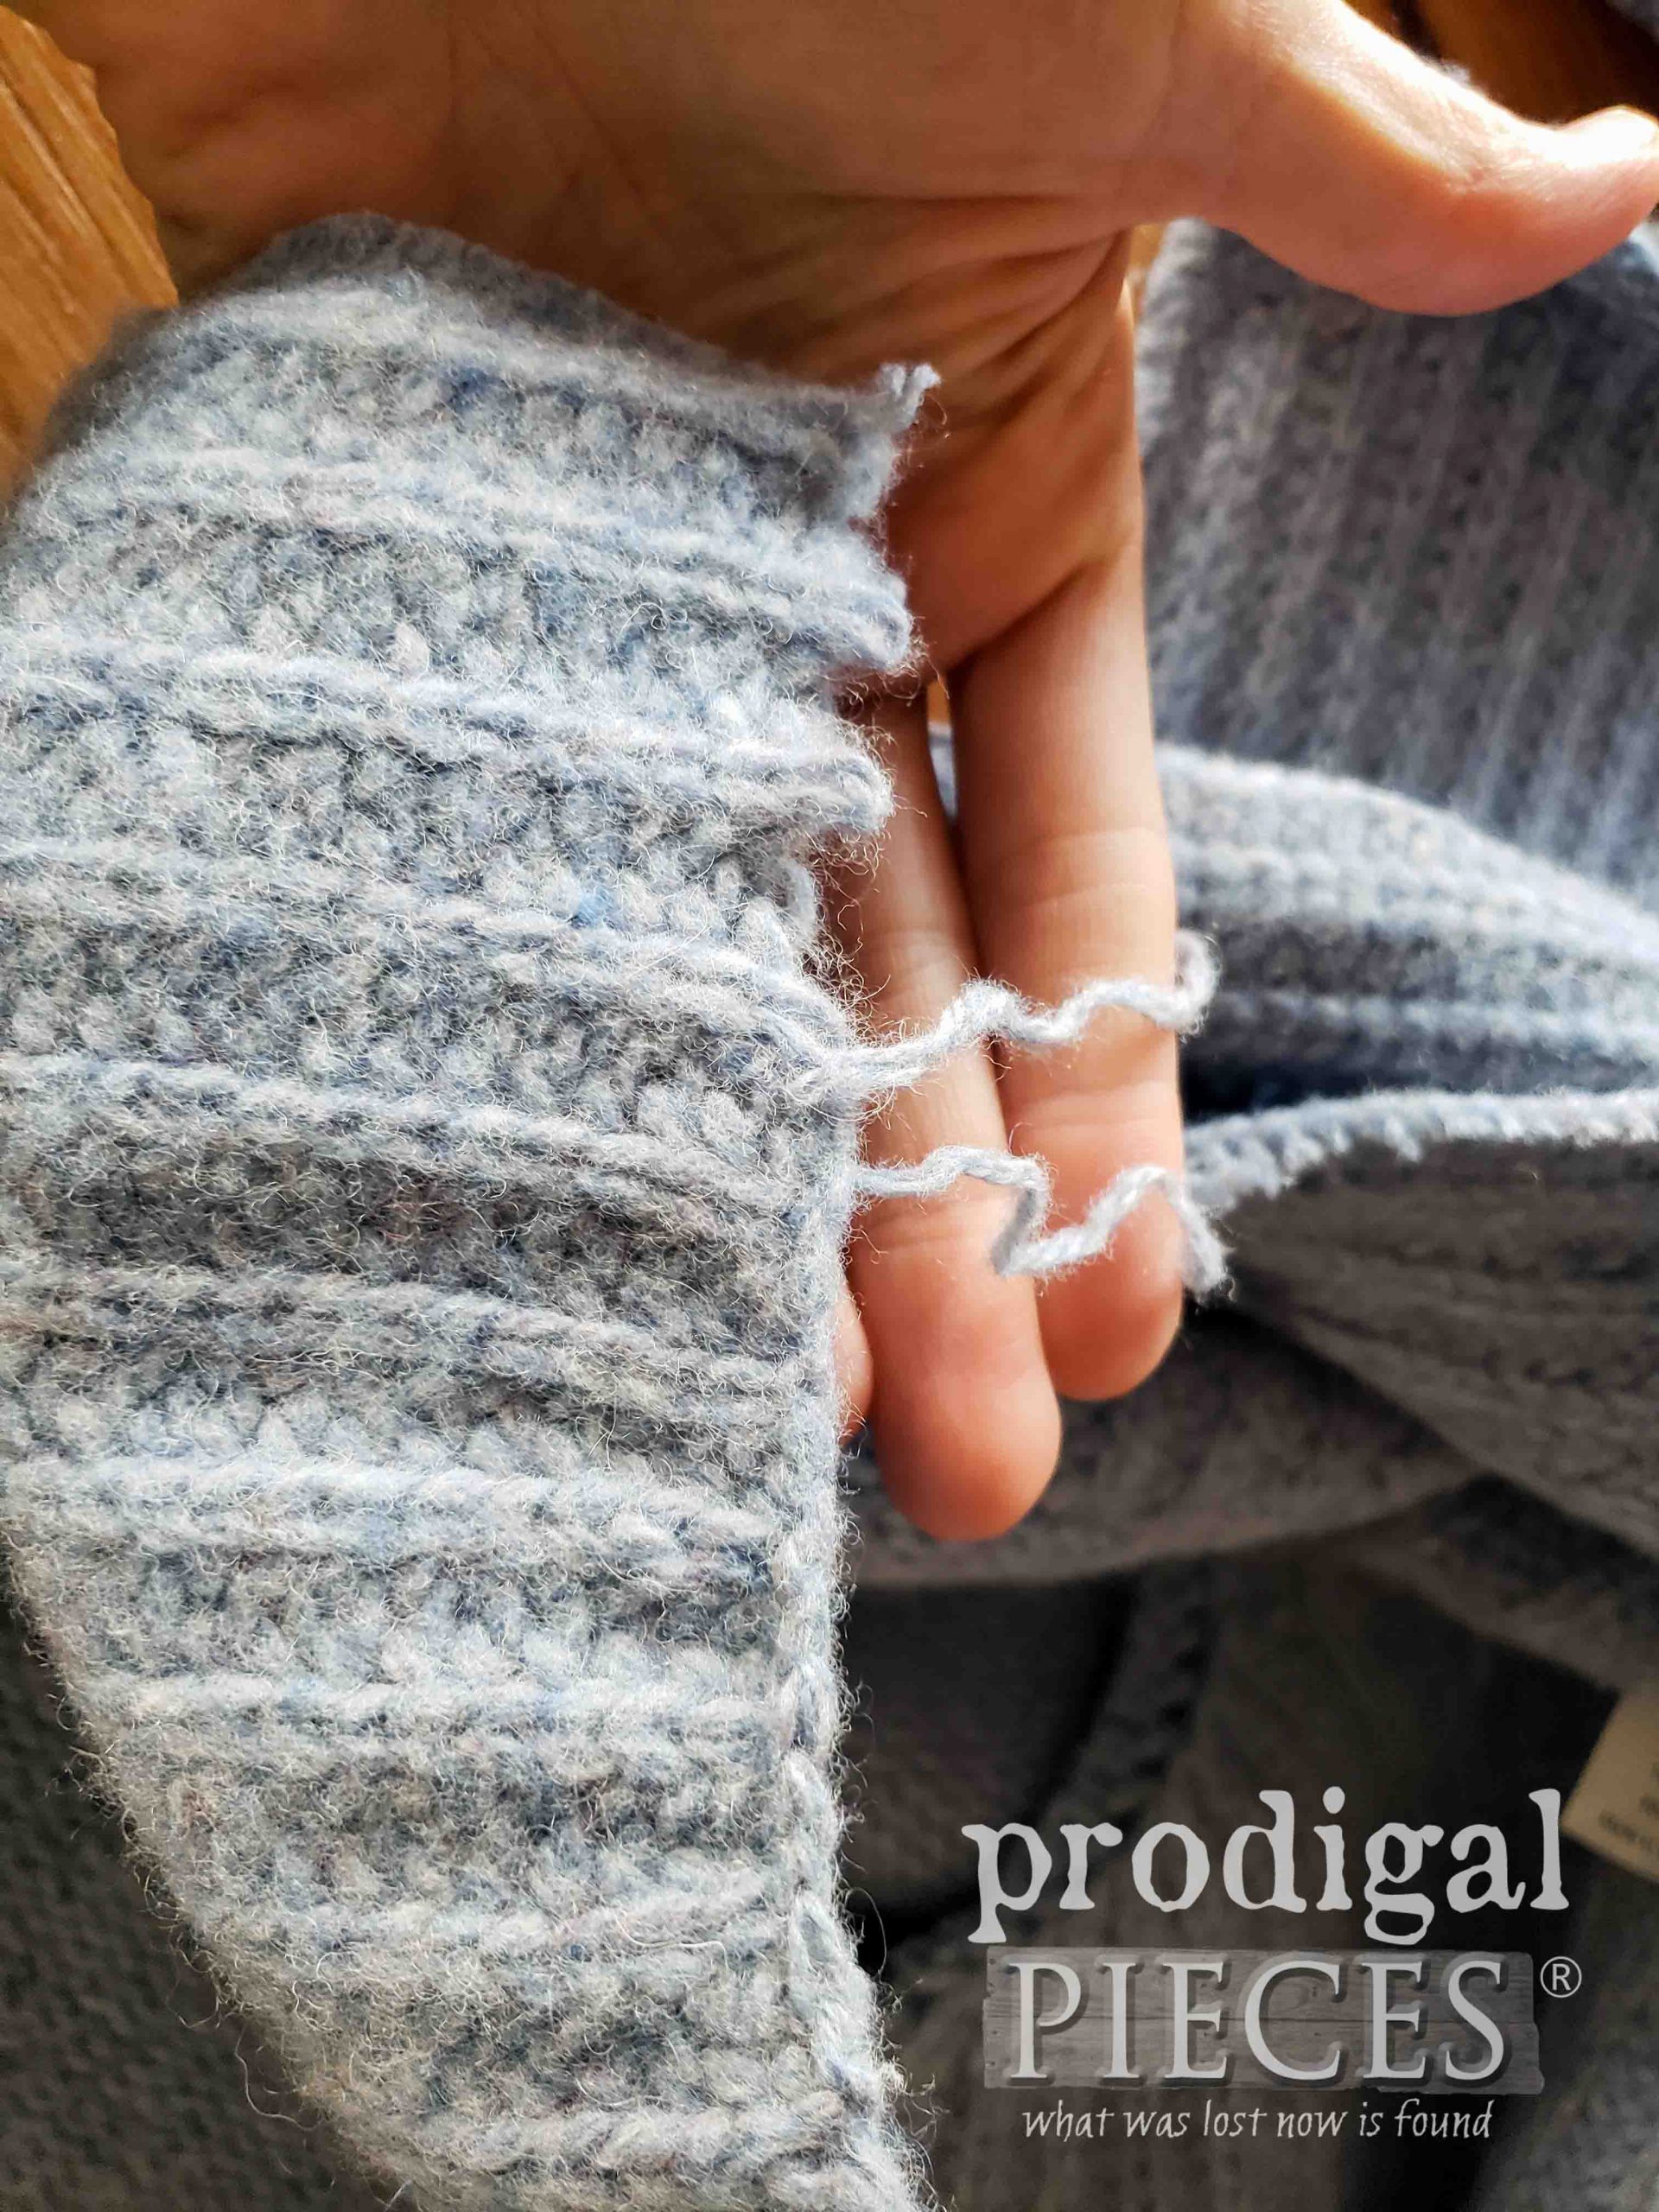 Unraveling Thrifted Wool Sweater for DIY Dryer Balls | prodigalpieces.com #prodigalpieces